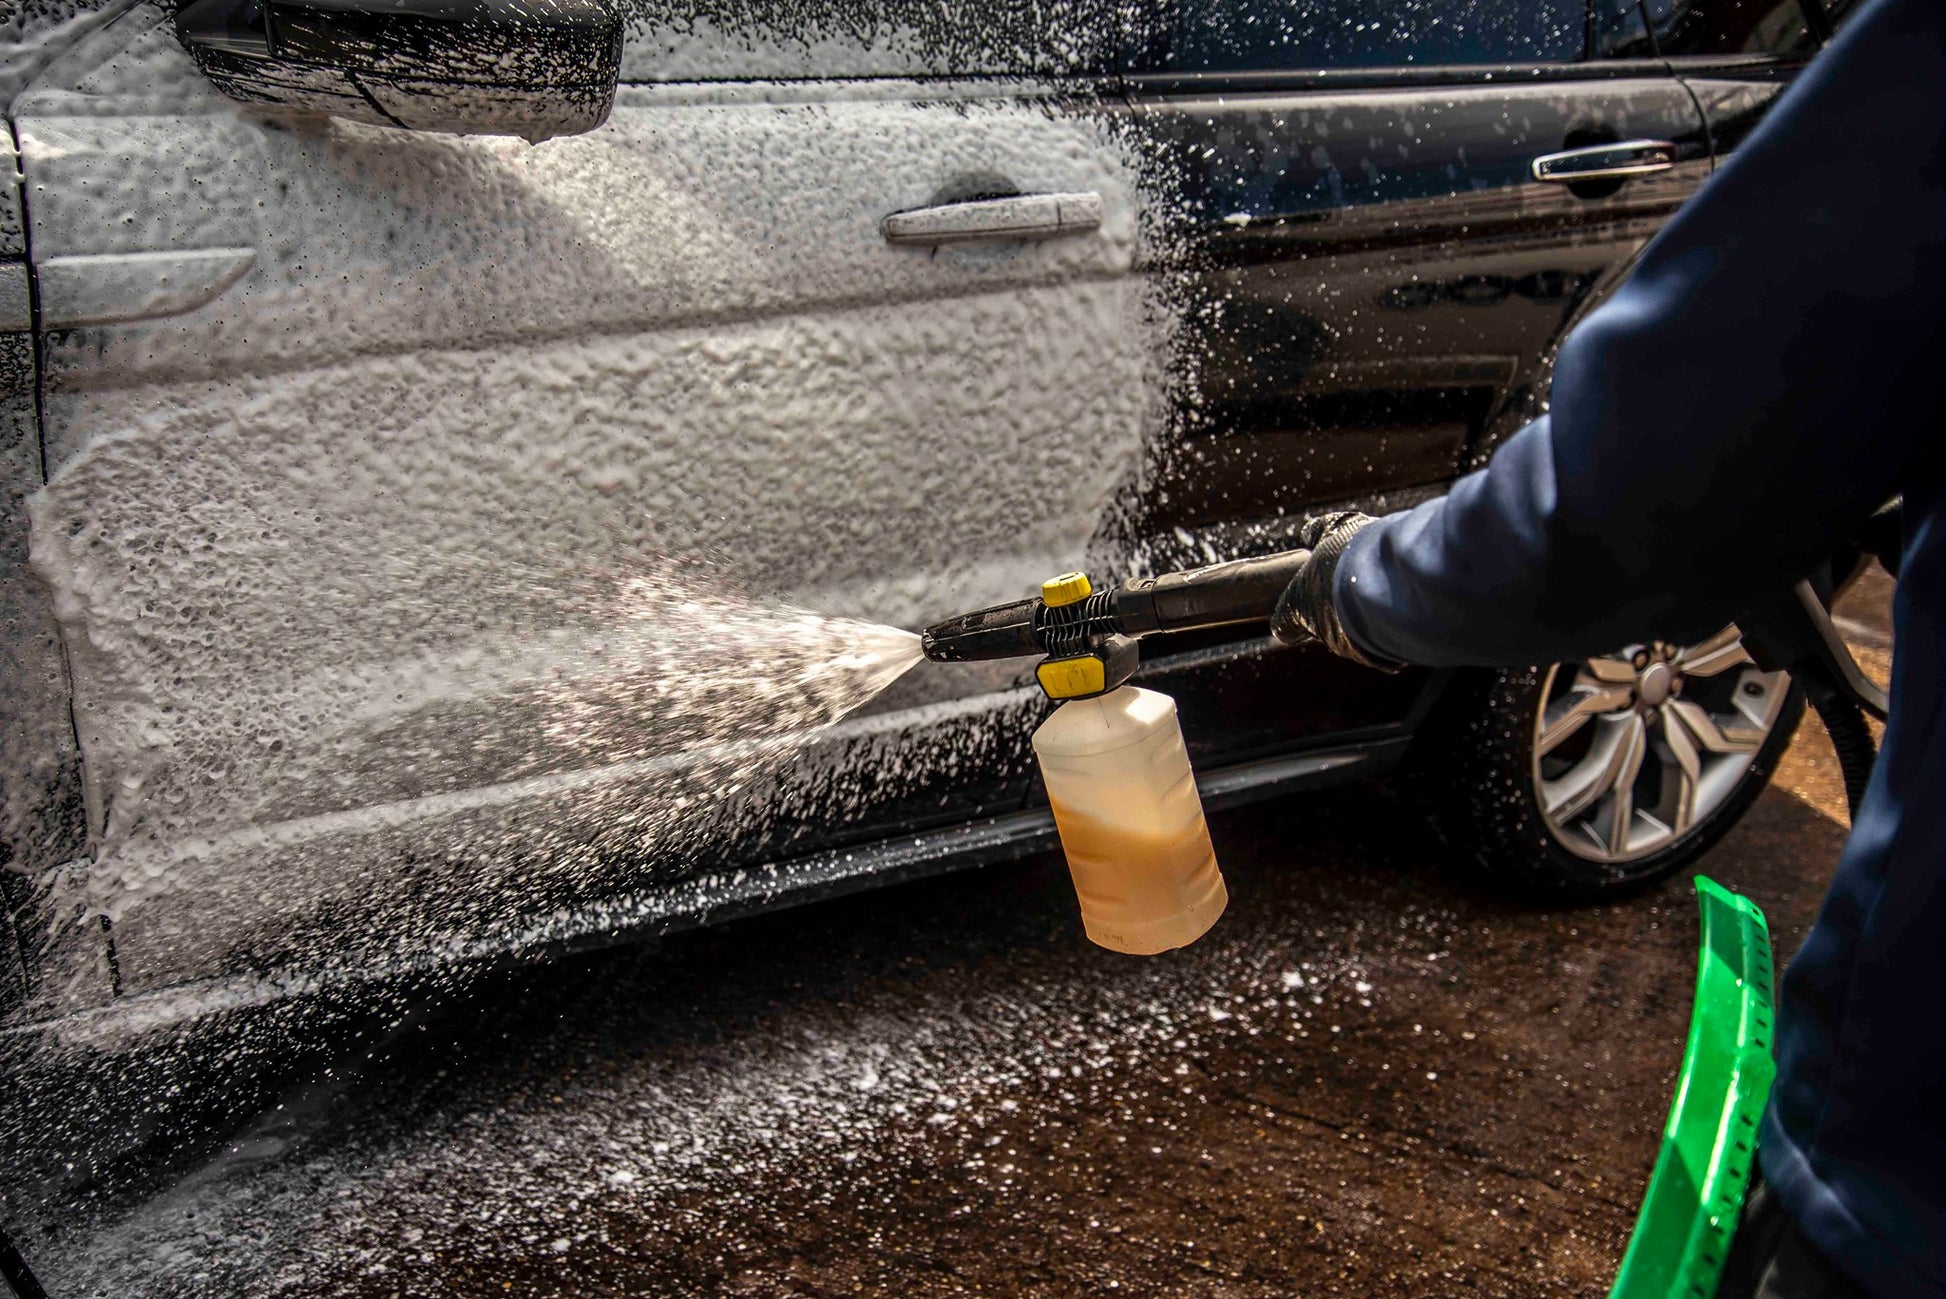 Duofoam+ - pH Balanced Snowfoam 1ltrDuofoam+ features next generation micro foam technology which can be applied using any domestic or professional pressure washer with a foam attachment or a foam gun. Duofoam+ small bubble size means more contact with th